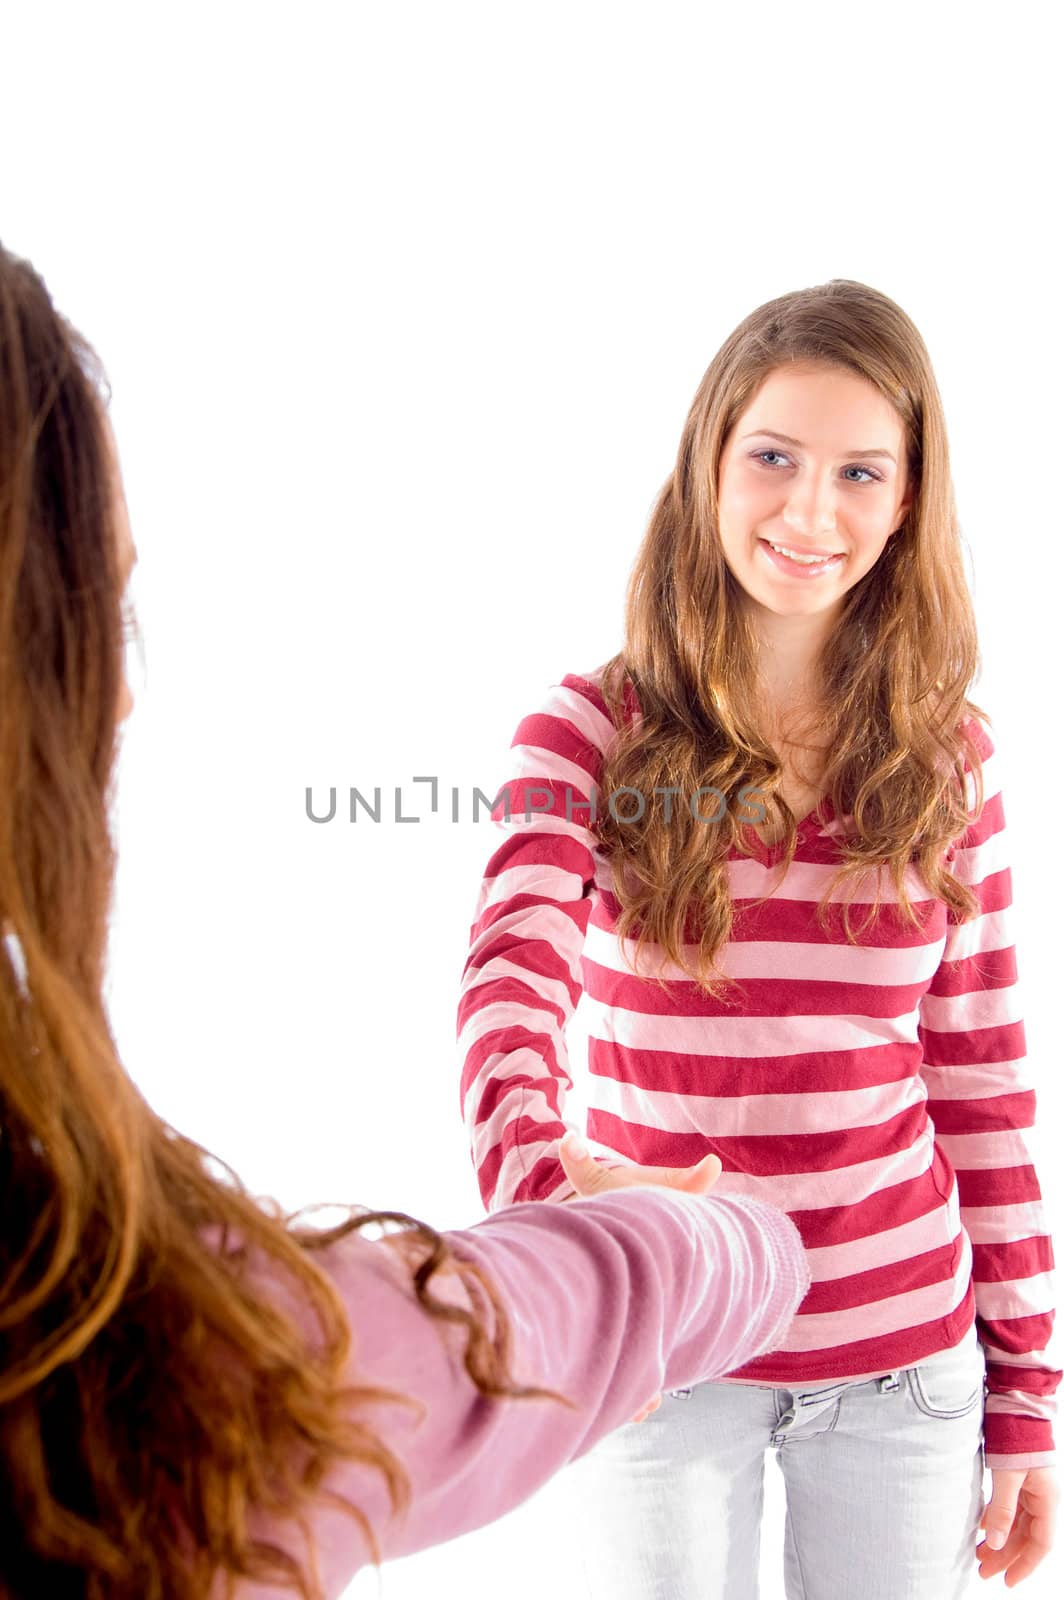 friendly girls shaking hands on an isolated white background